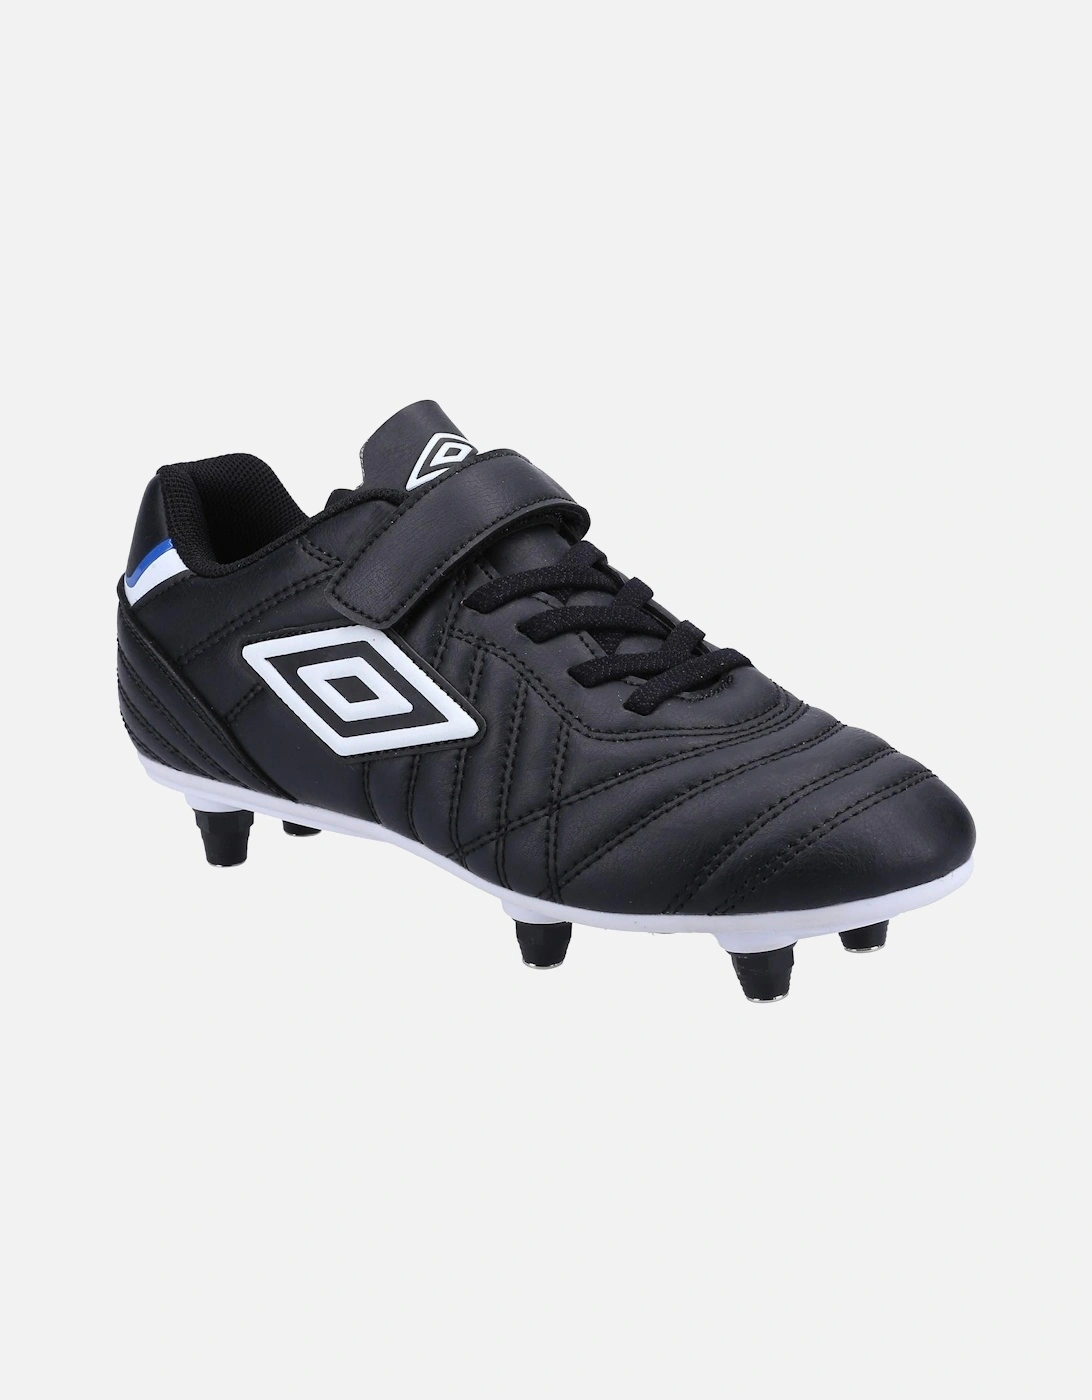 Childrens/Kids Speciali Liga Leather Football Boots